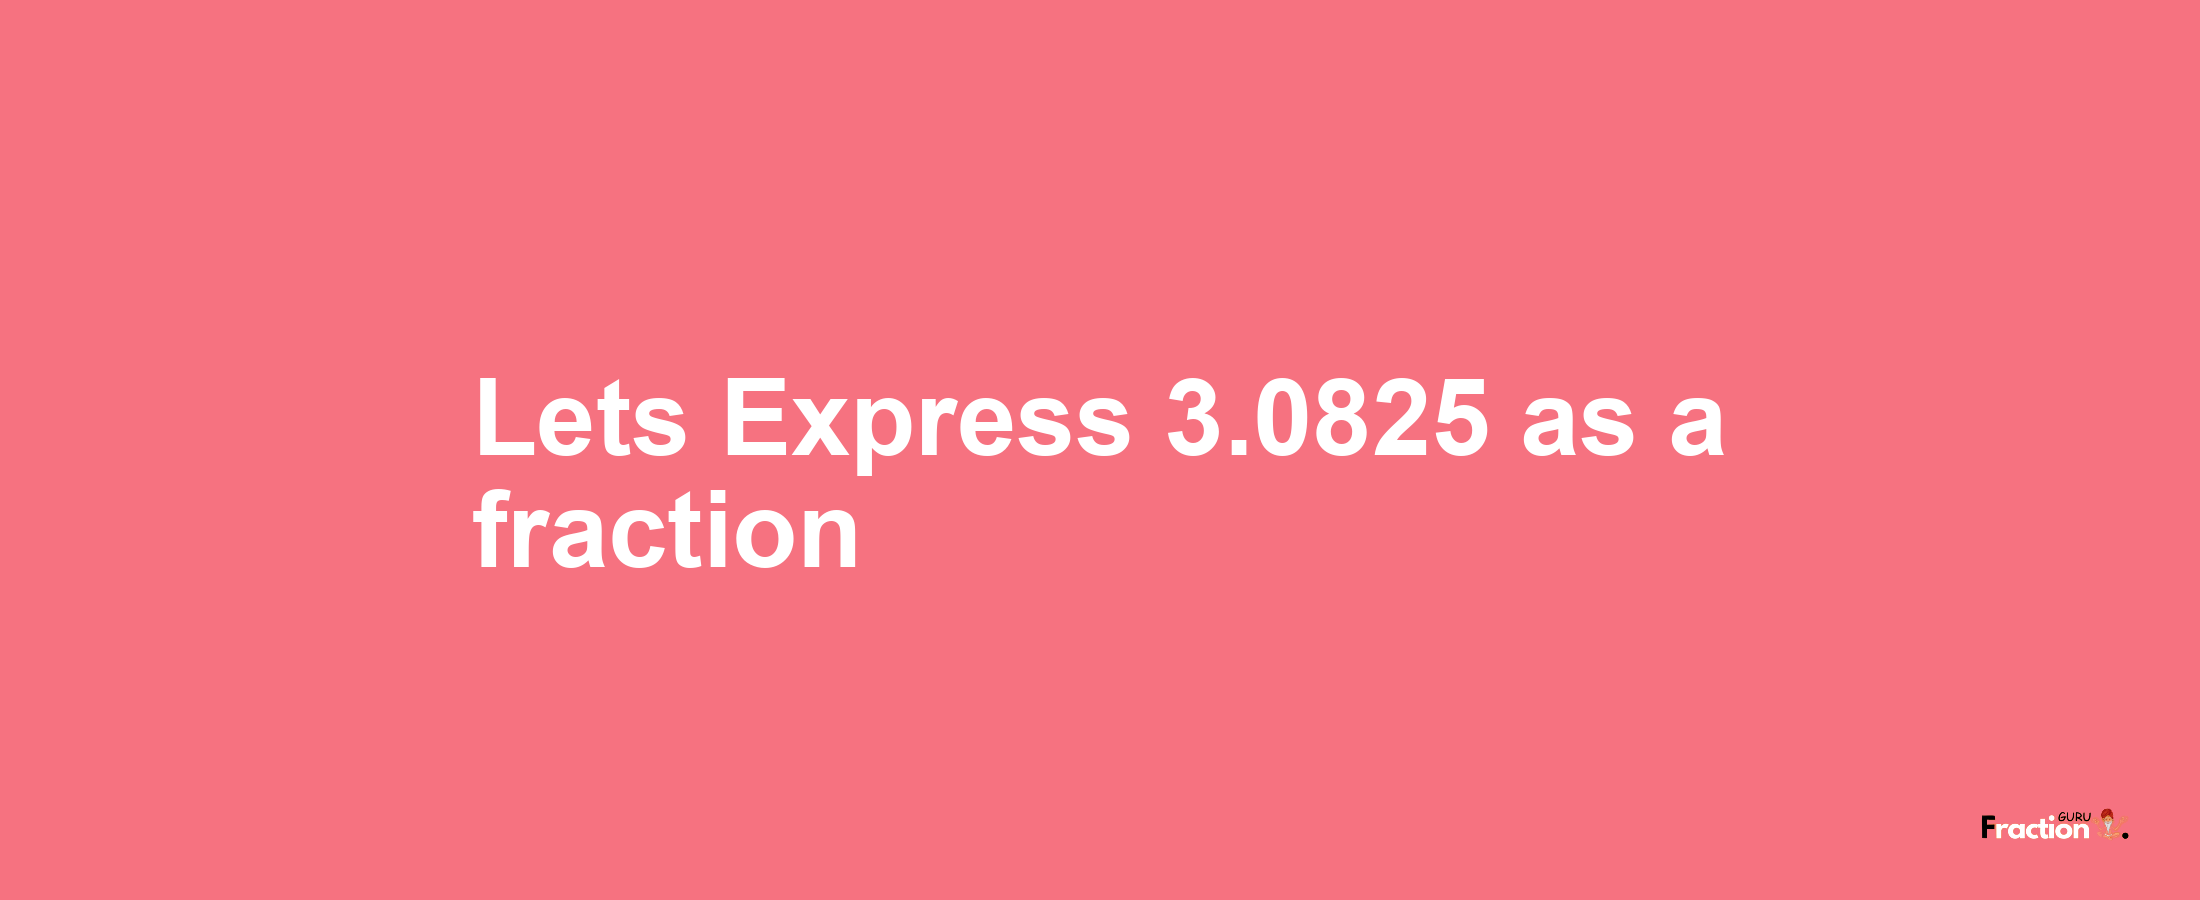 Lets Express 3.0825 as afraction